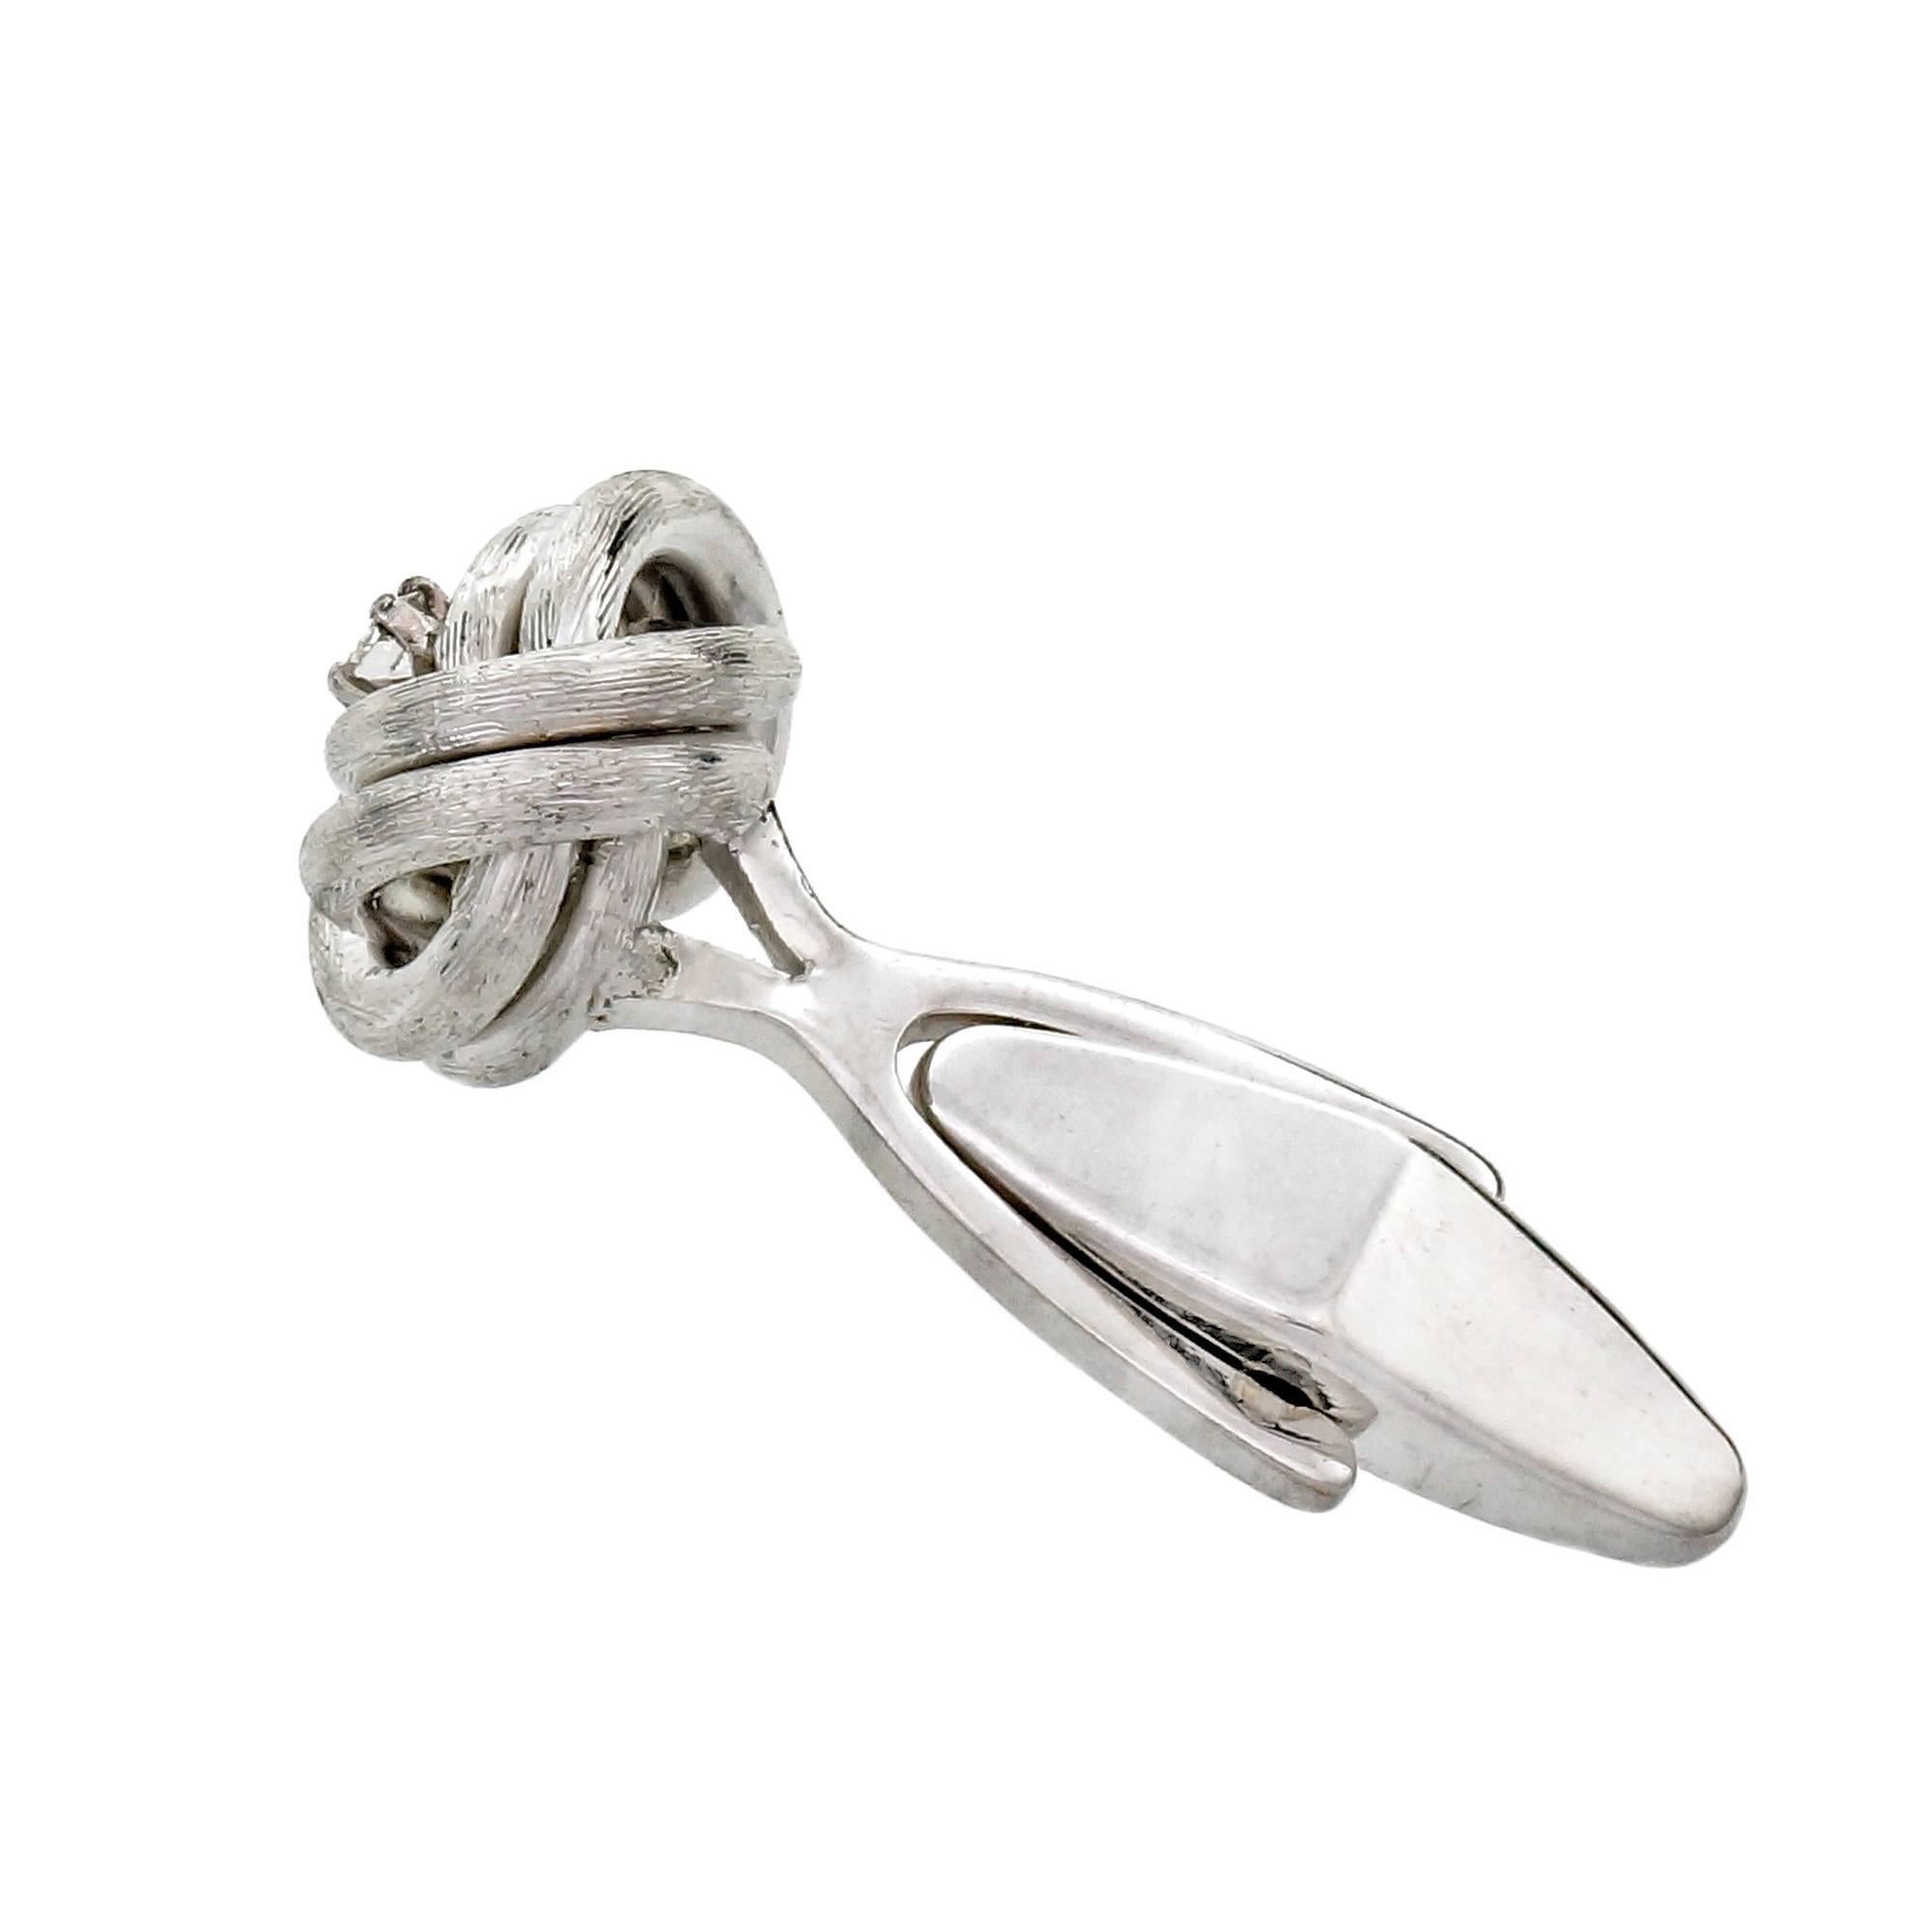 Da Vinci solid heavy textured 14k white gold knot cuff links with bright full cut Diamonds.

14k white gold
2 round Diamonds, approx. total weight .14cts, G, VS2
Top to bottom: 13.33mm or .52 inch
Width: 13.08mm or .52 inch
Depth: 8.95mm
15.1